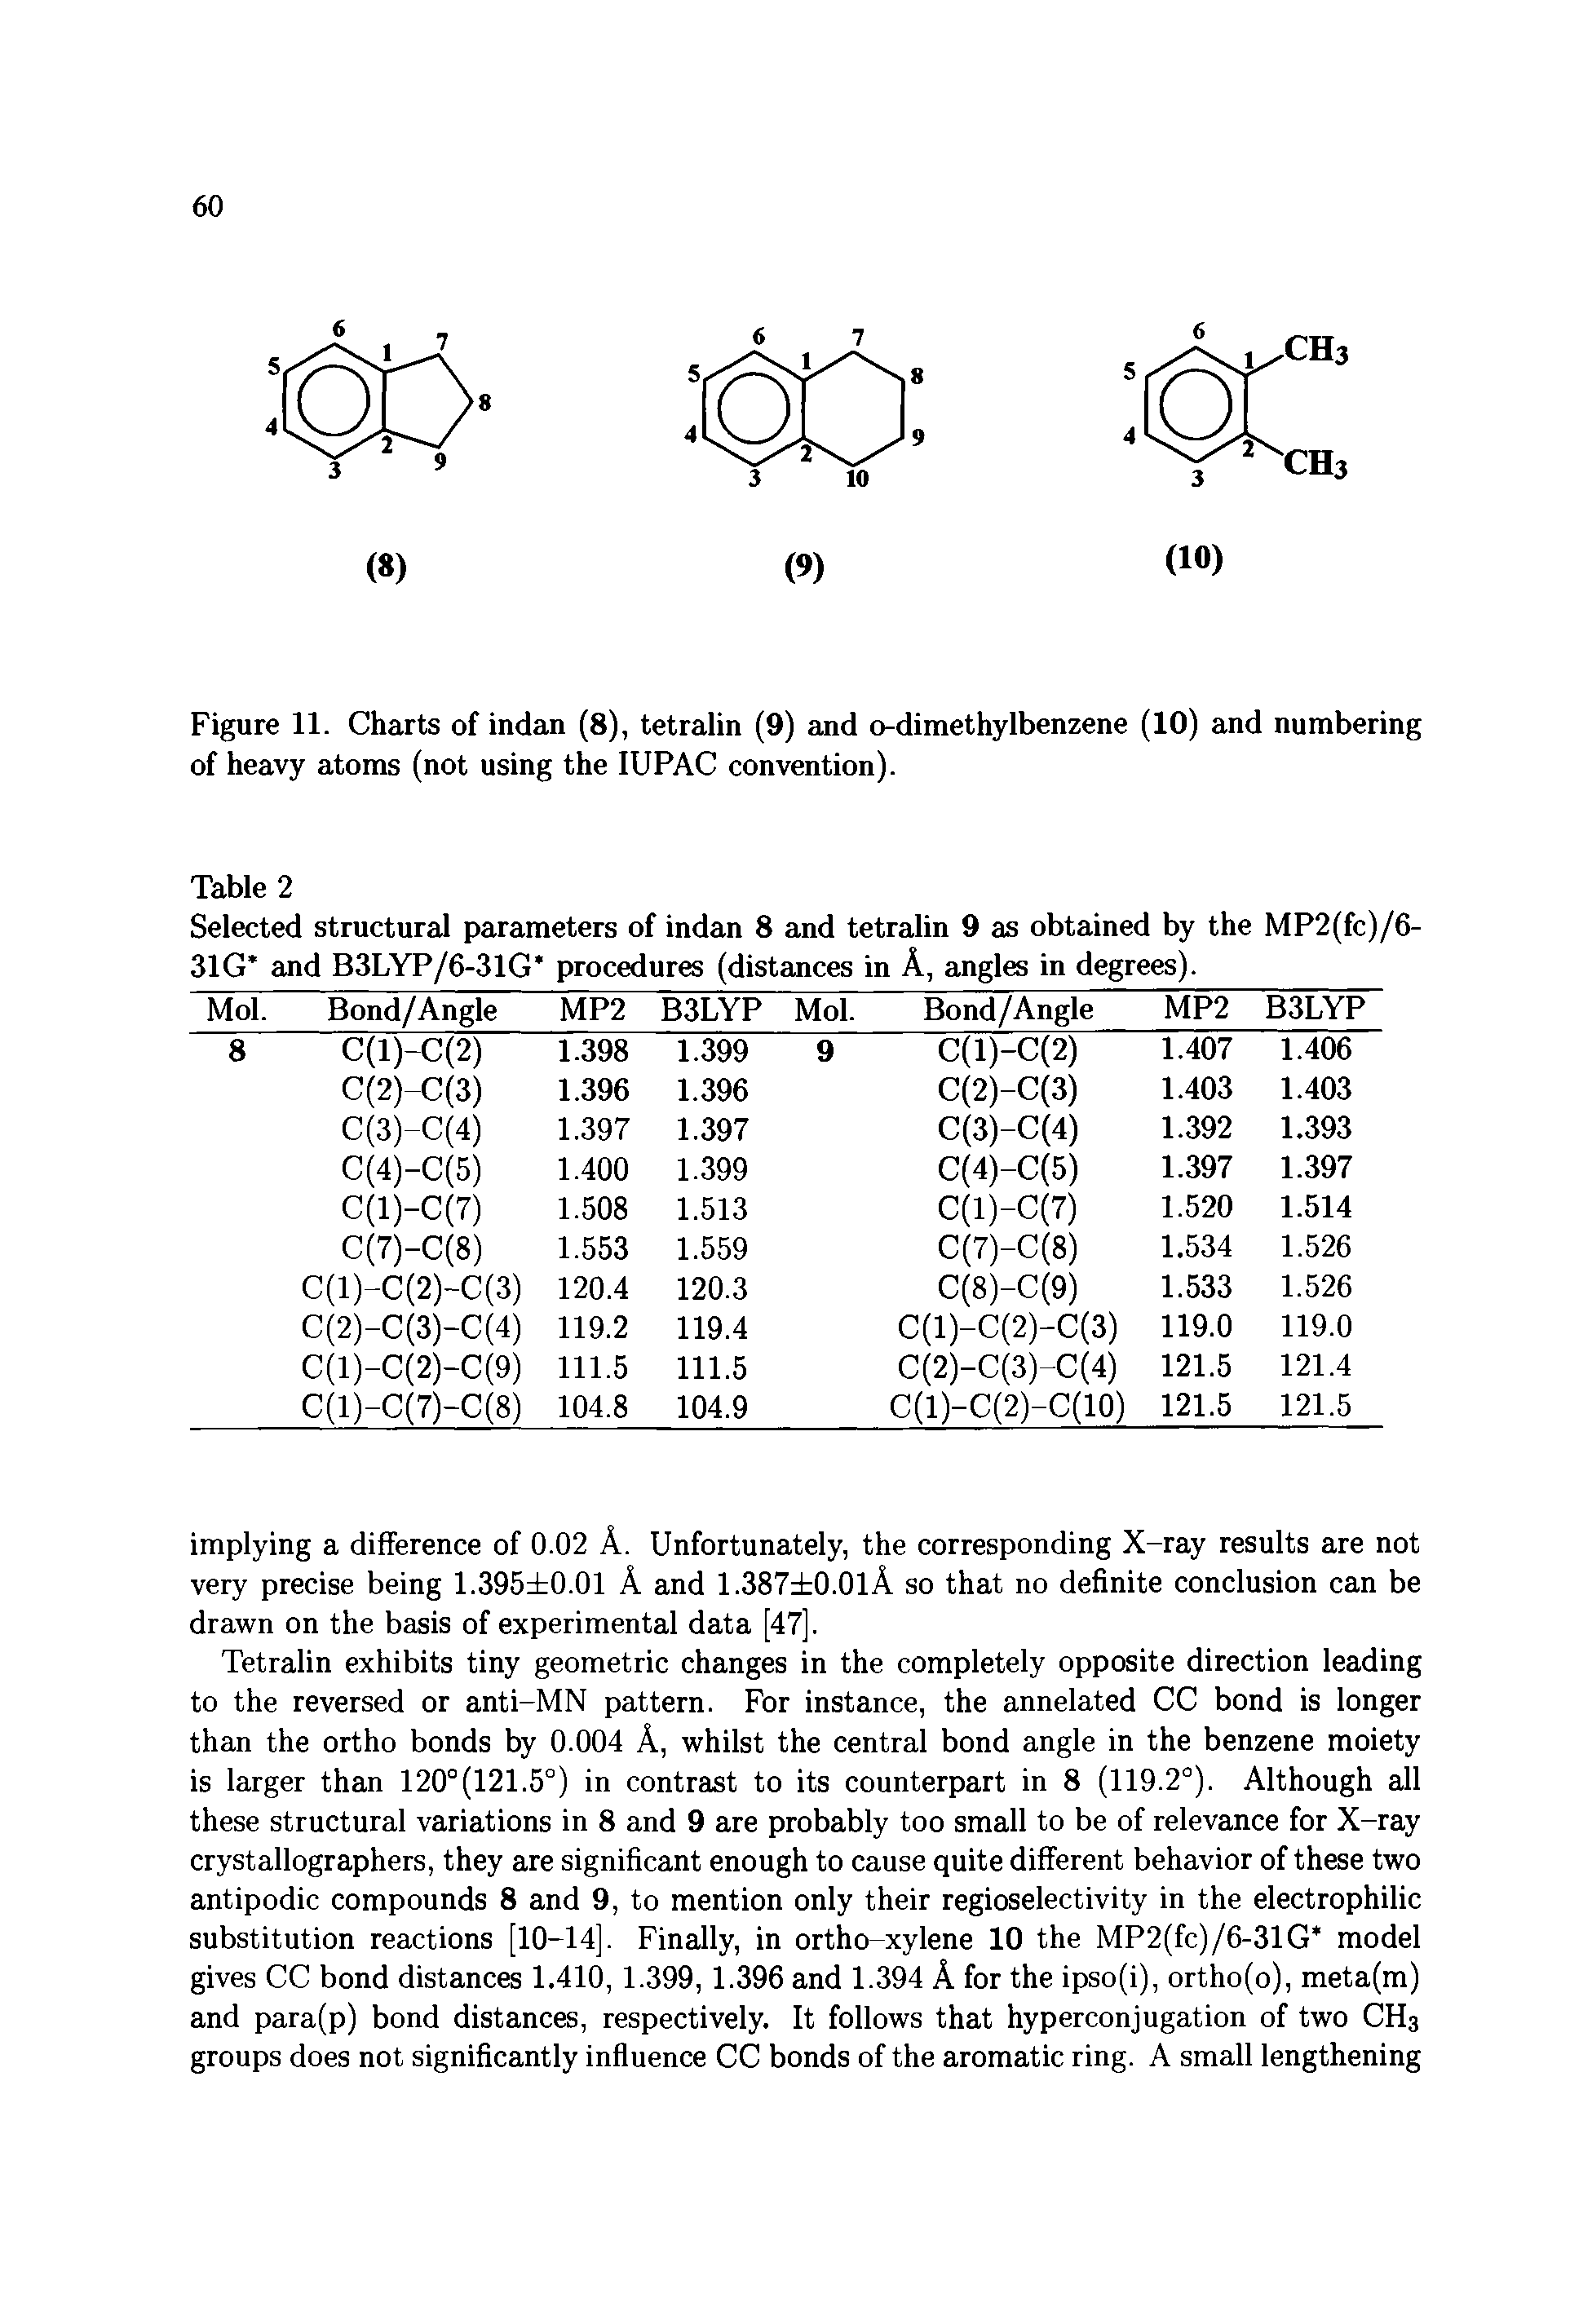 Figure 11. Charts of indan (8), tetralin (9) and o-dimethylbenzene (10) and numbering of heavy atoms (not using the IUPAC convention).